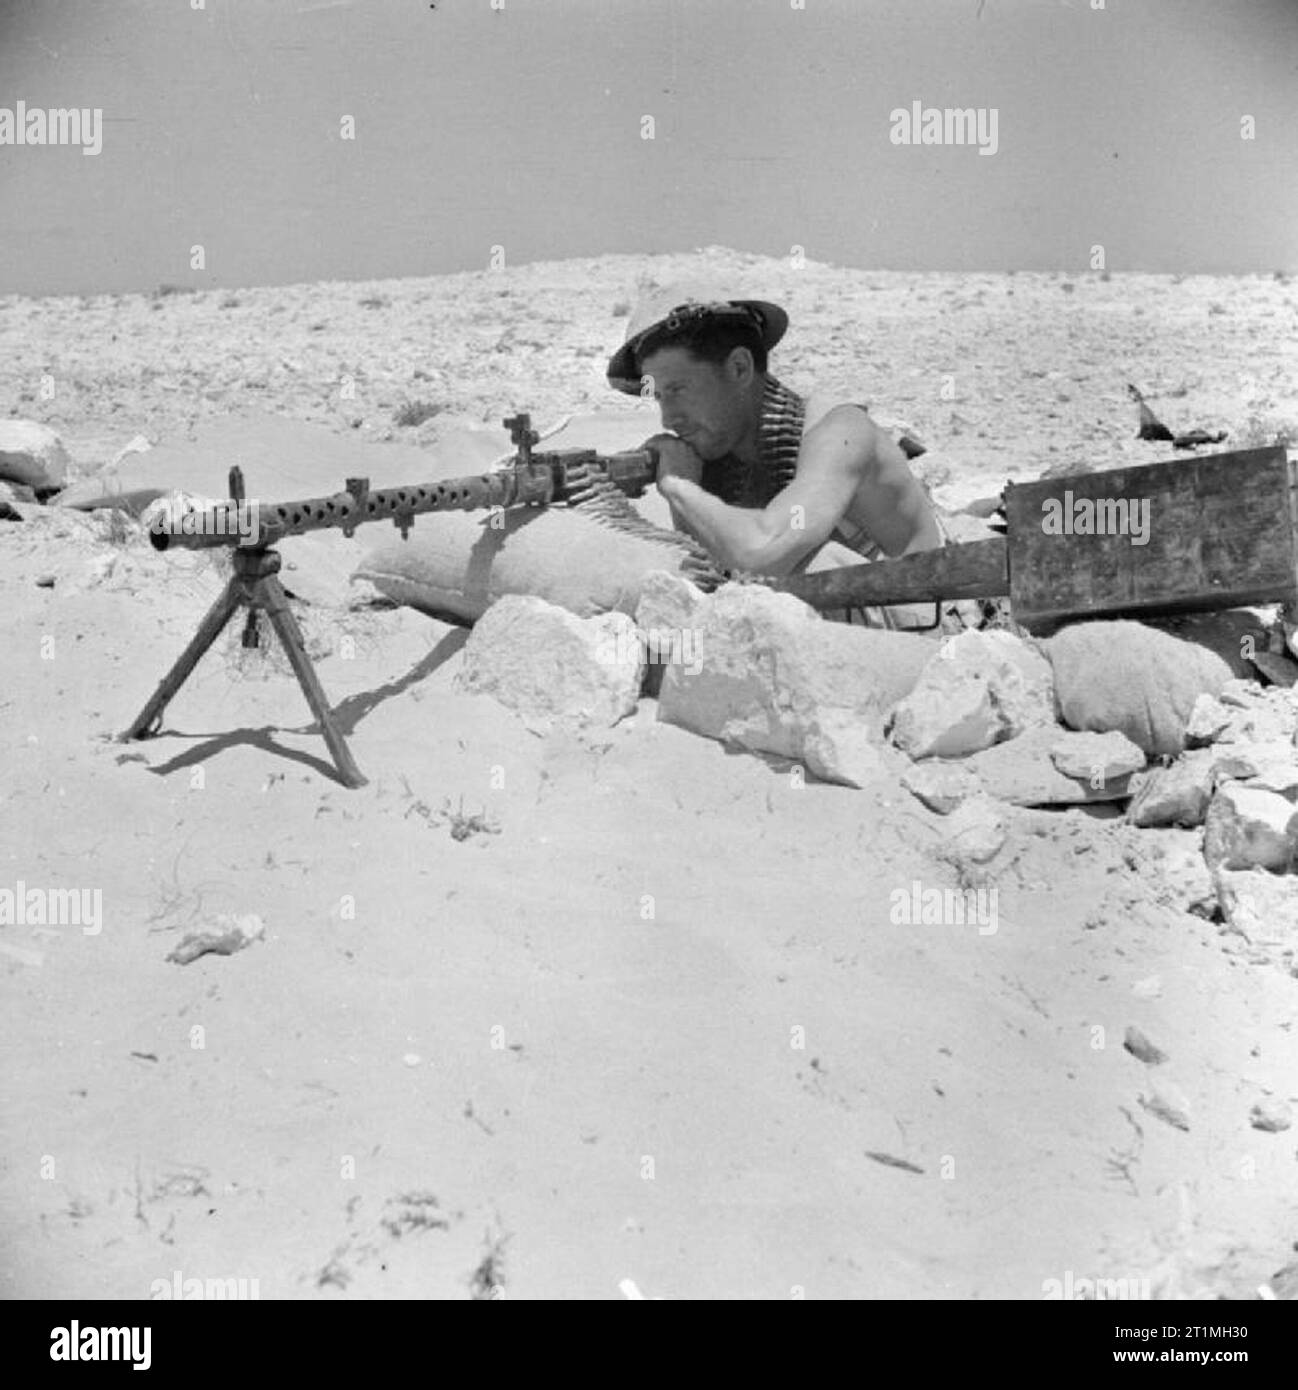 Commonwealth Forces in North Africa 1942 An Australian soldier with a captured German MG 34 machine gun, 25 July 1942. Stock Photo